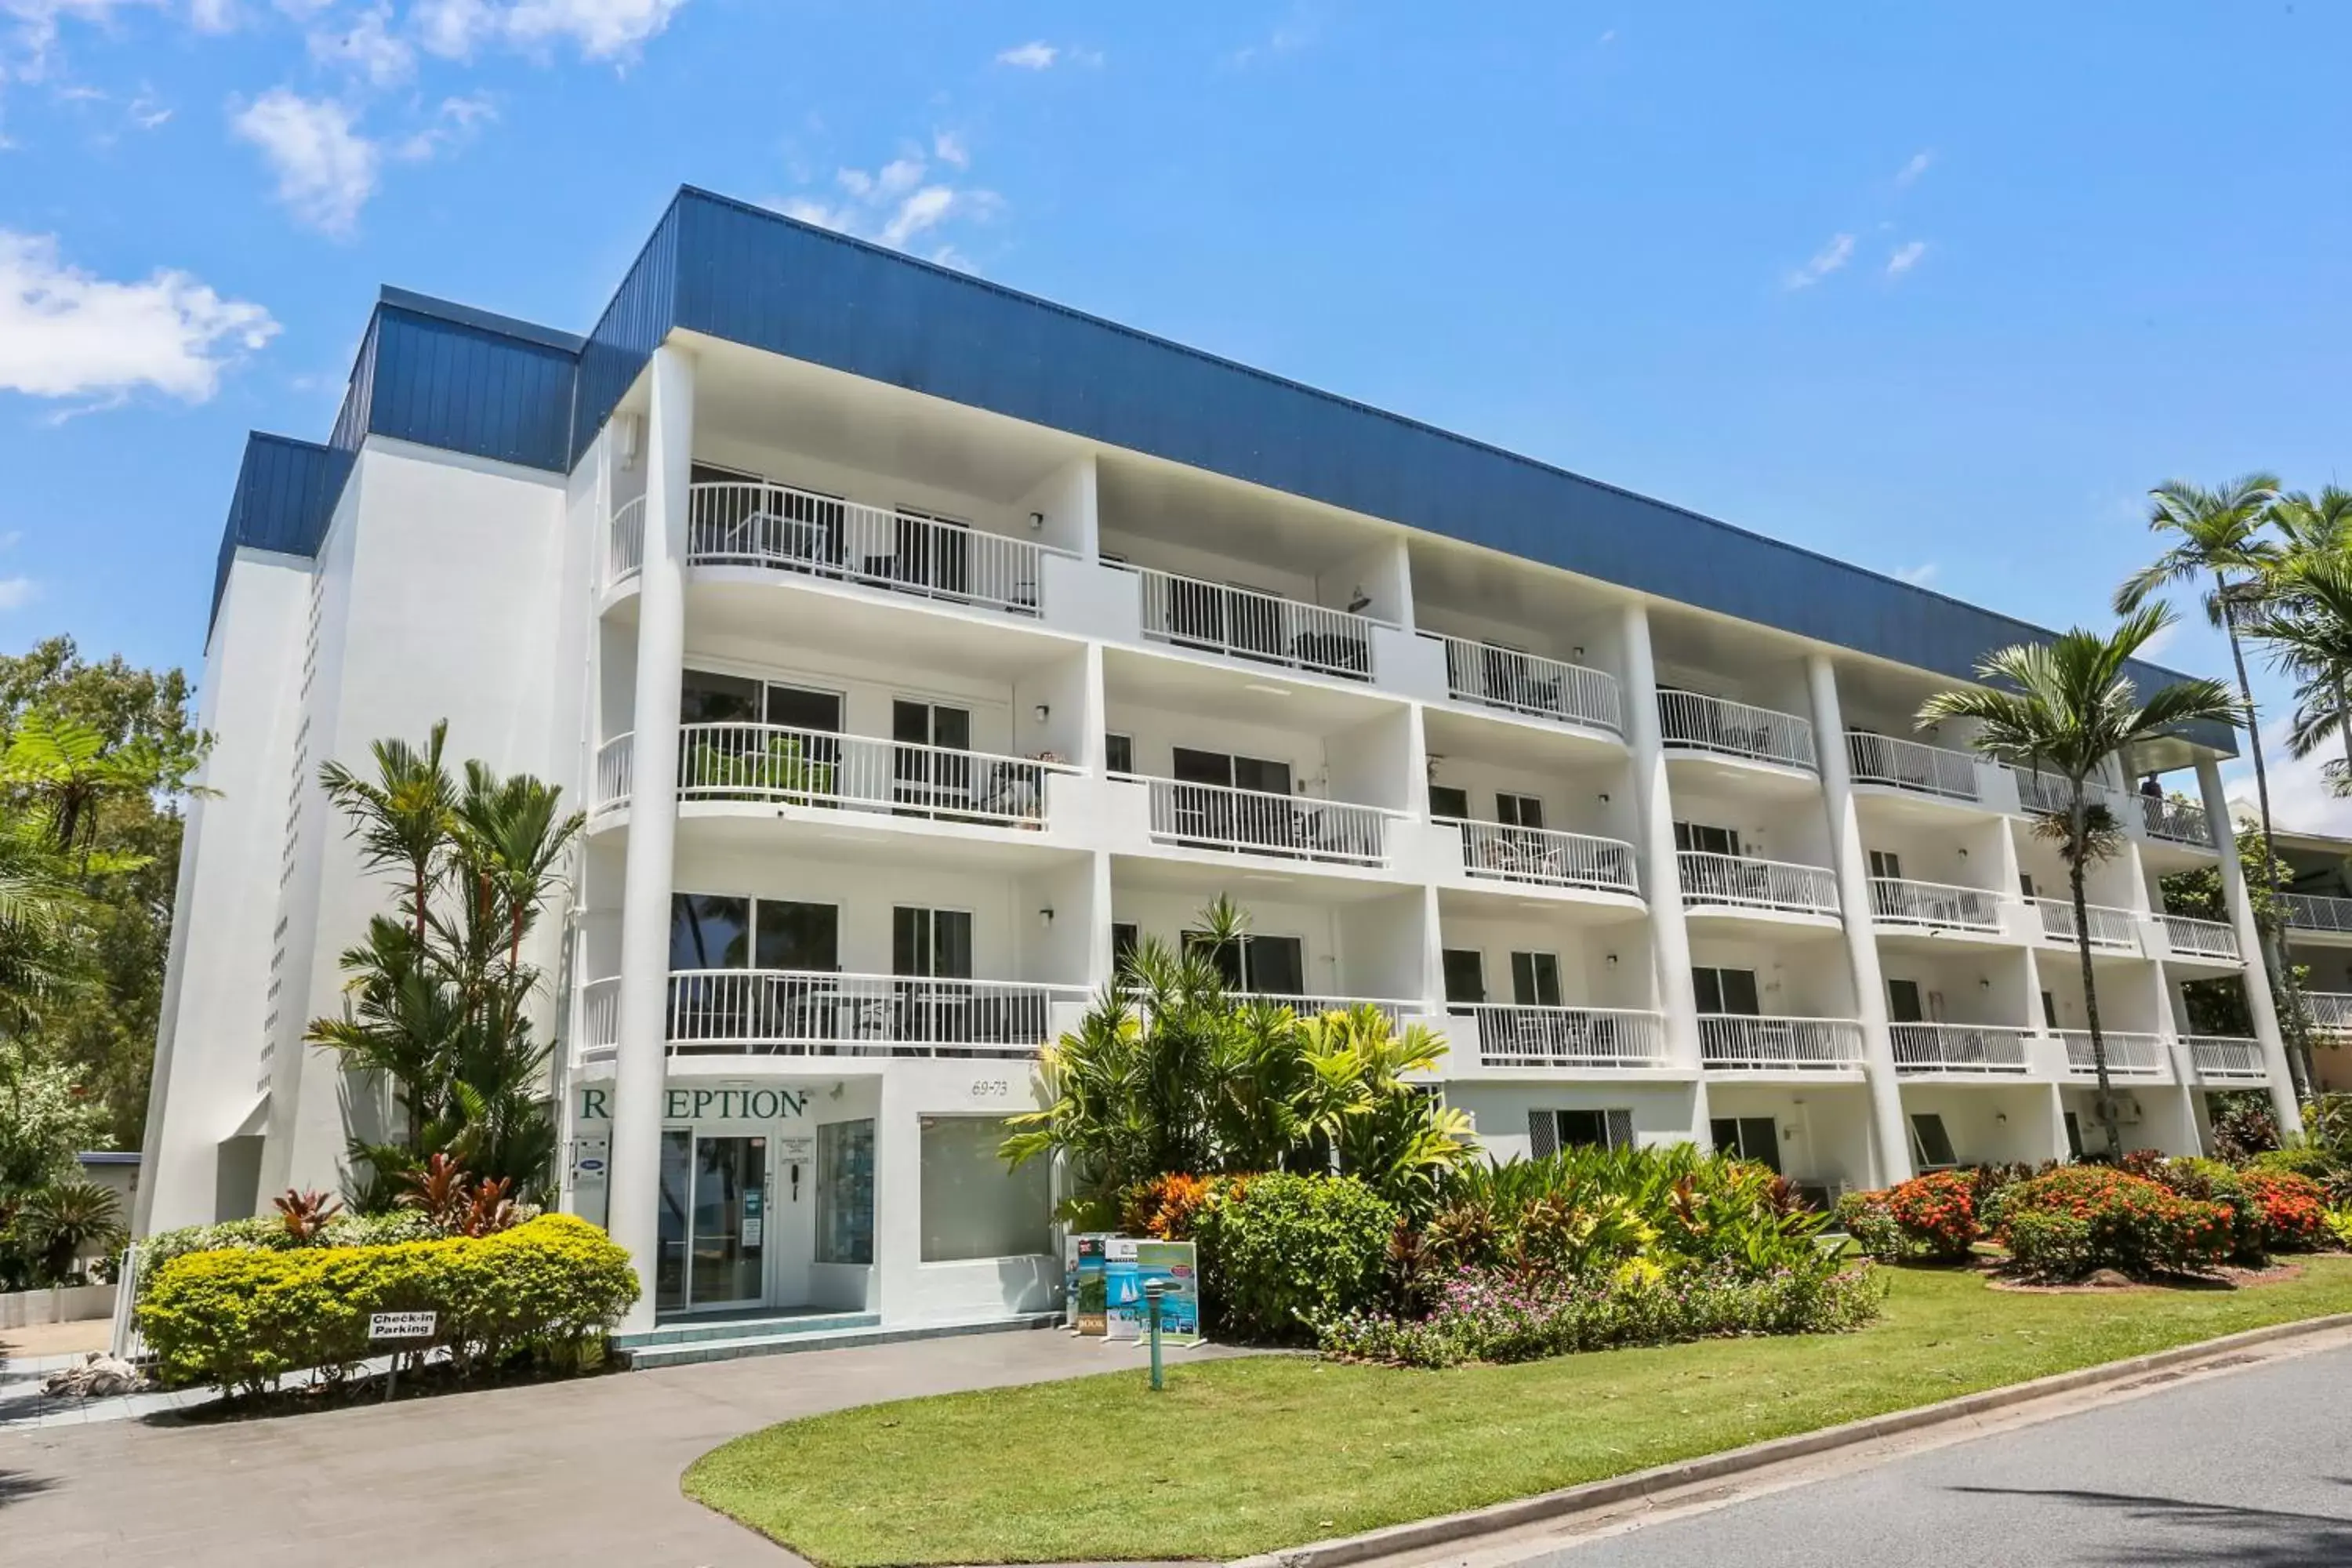 Property Building in Agincourt Beachfront Apartments